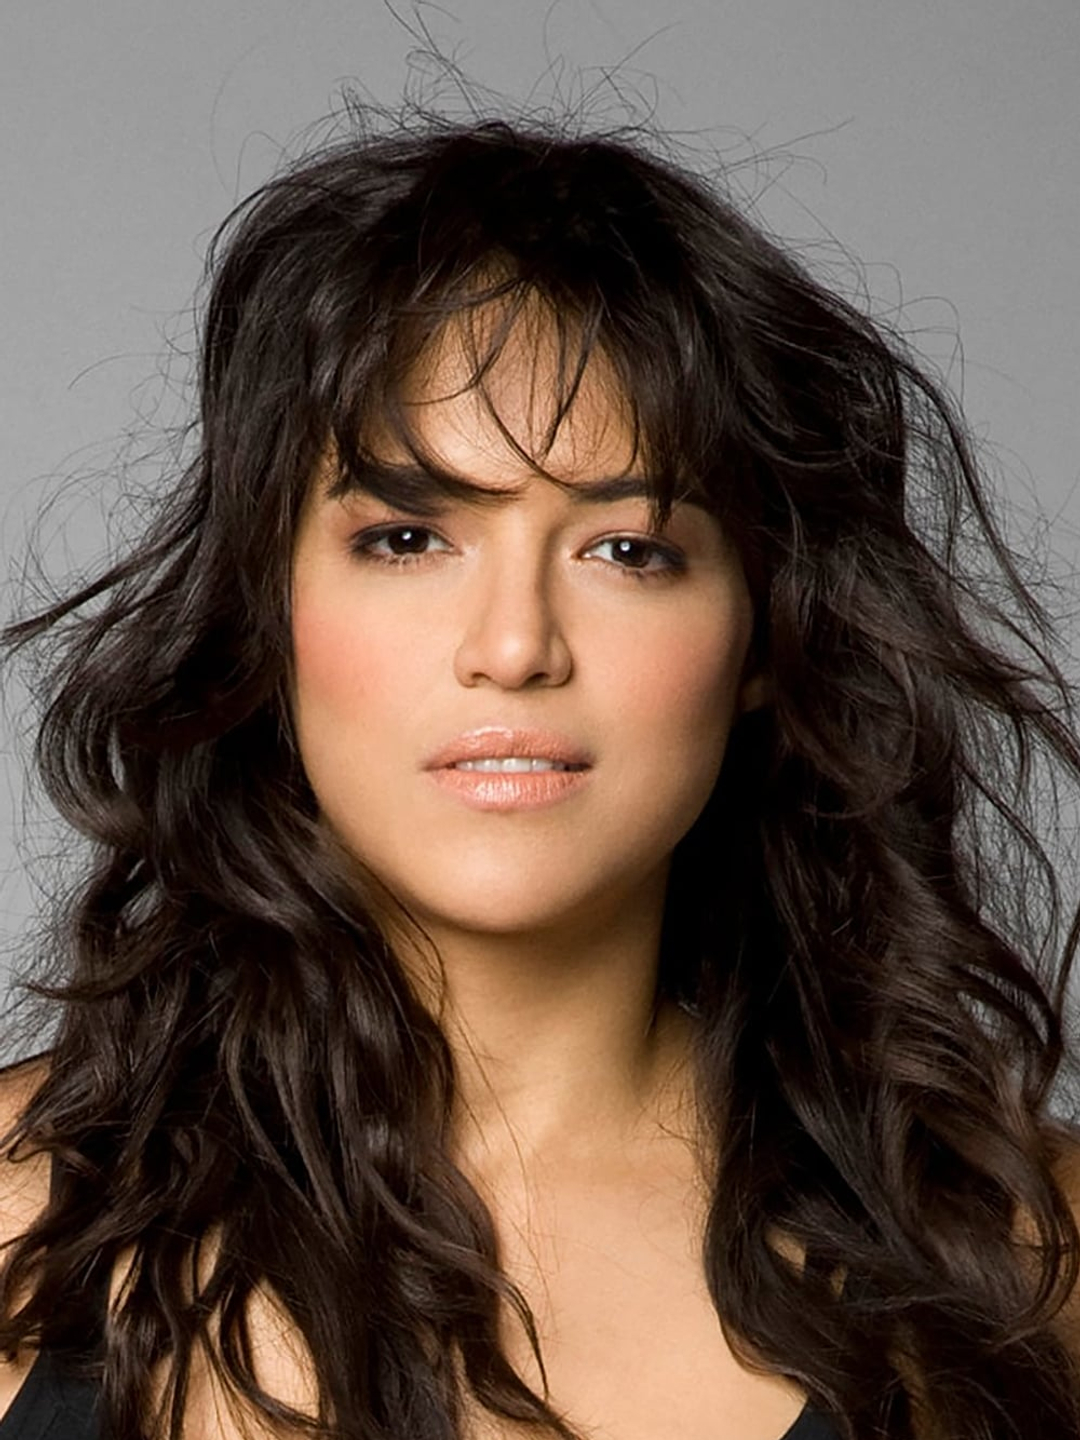 Michelle Rodriguez early life